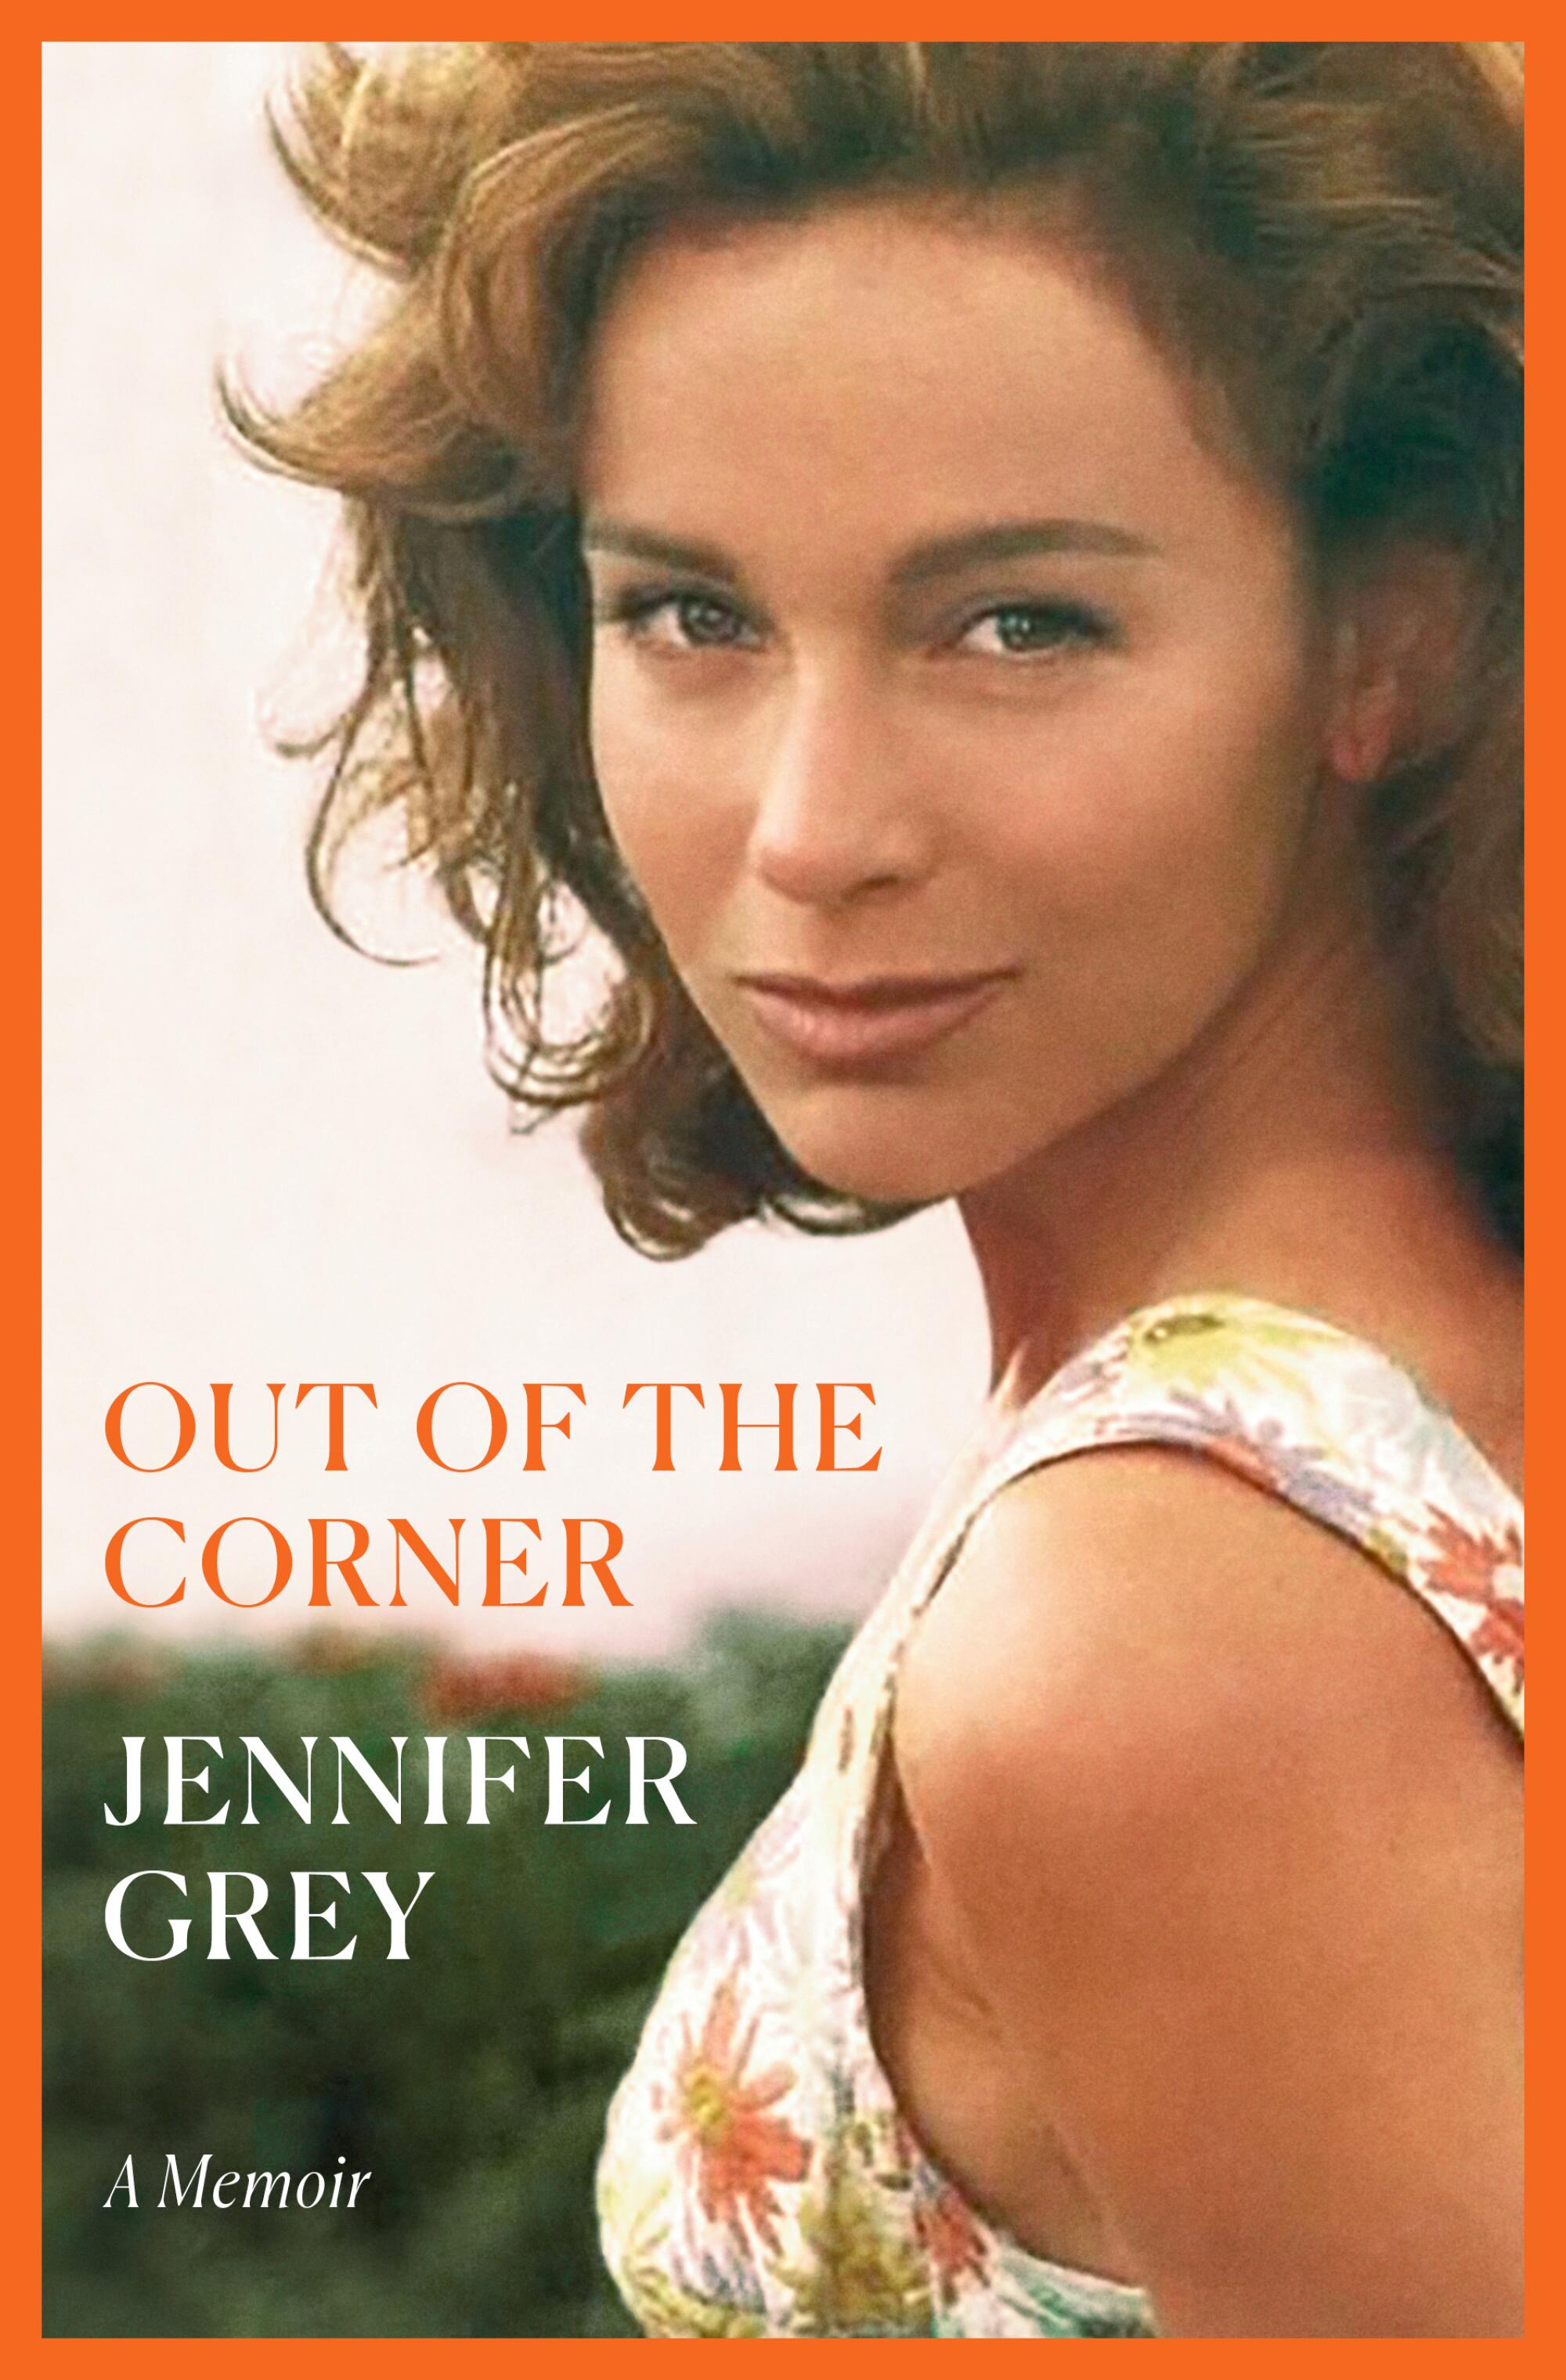 "Out of the Corner" by Jennifer Grey